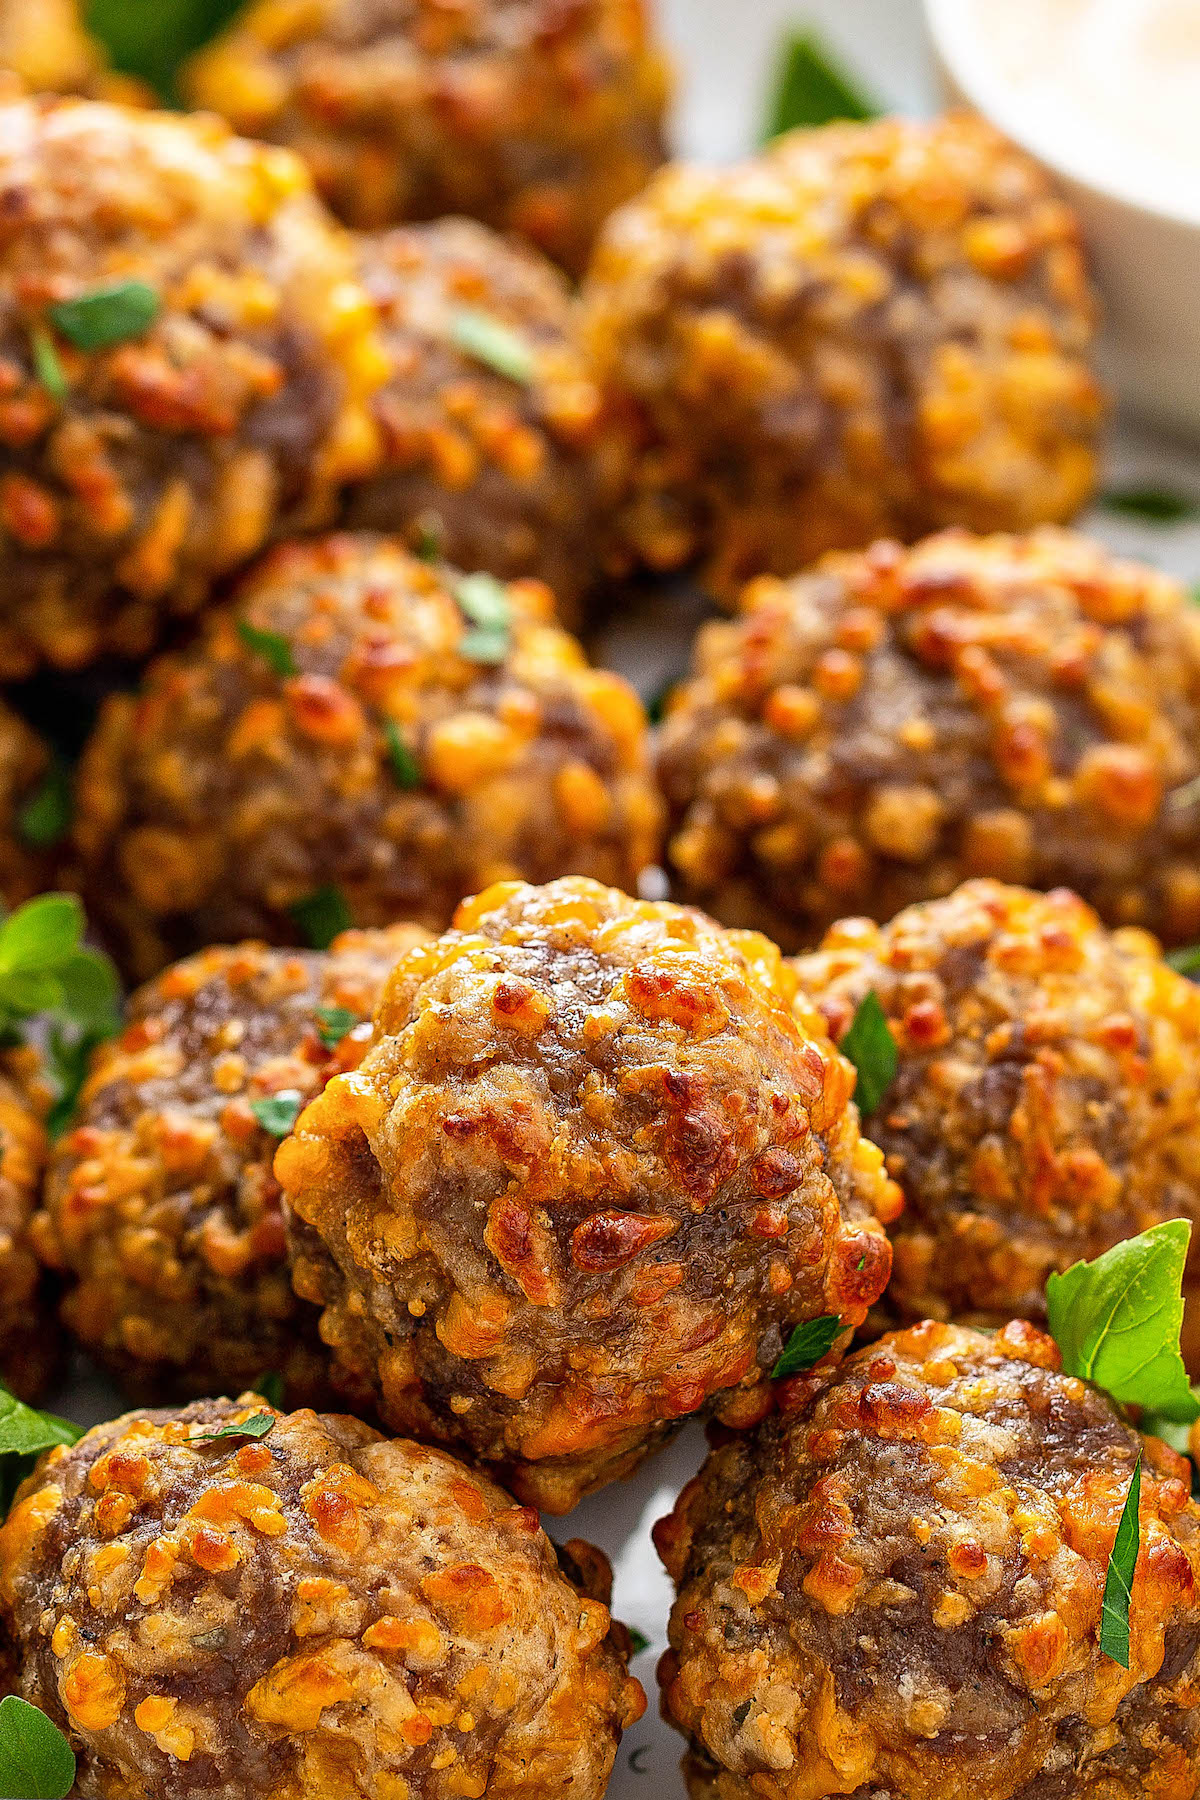 Sausage balls stacked on top of each other.